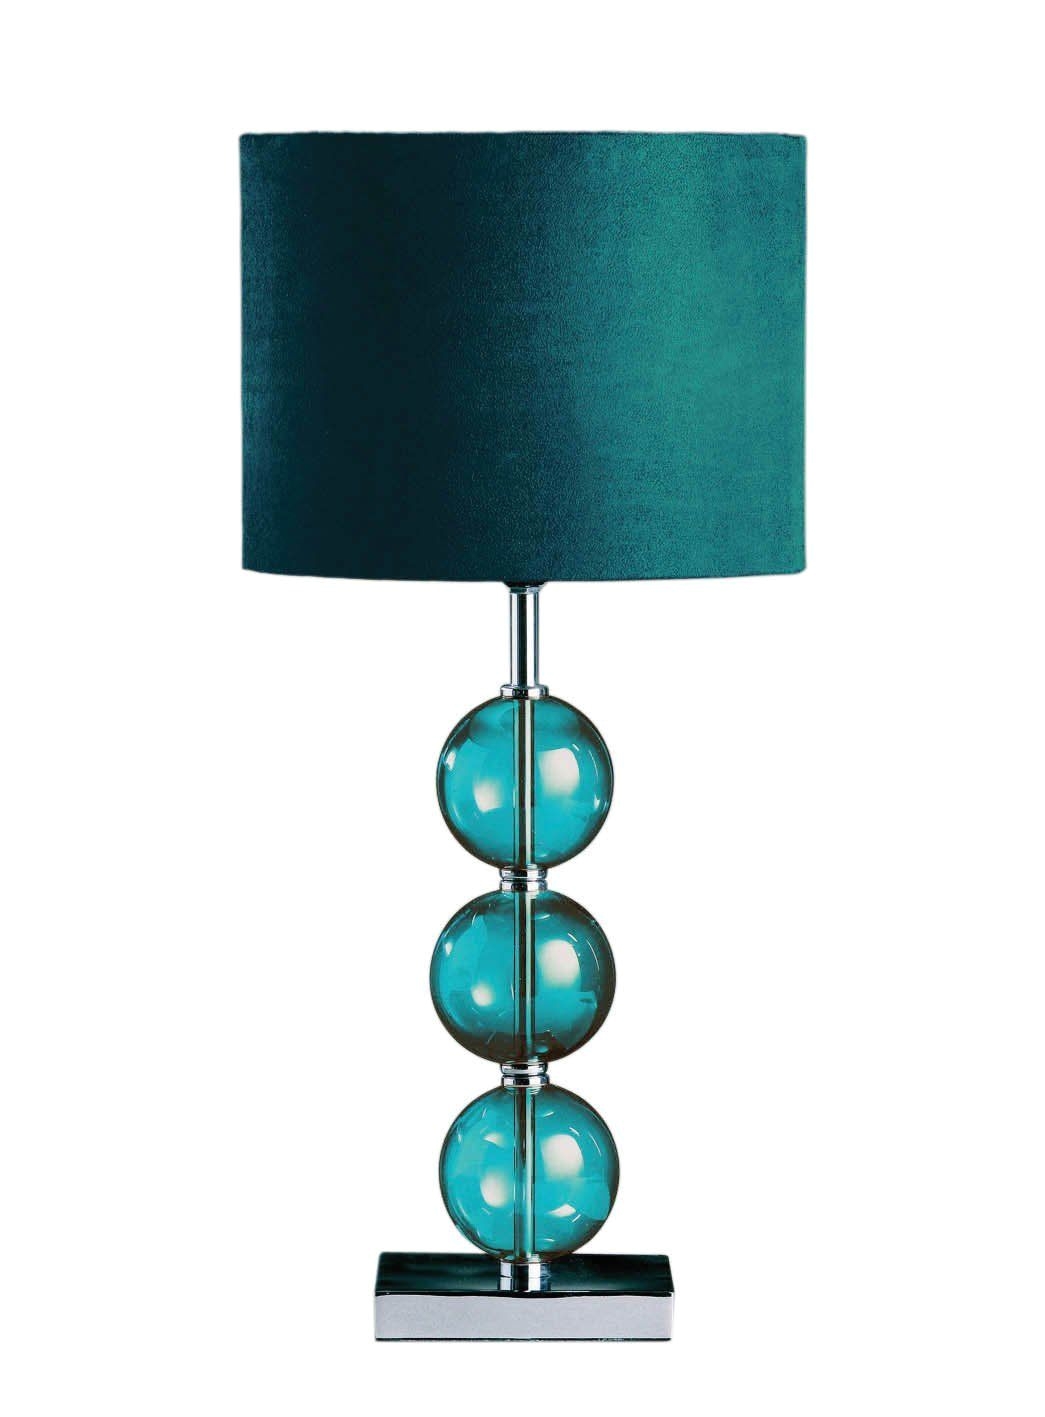 premier housewares mistro teal table lamp with 3 glass balls chrome base and faux suede shade amazon co uk lighting